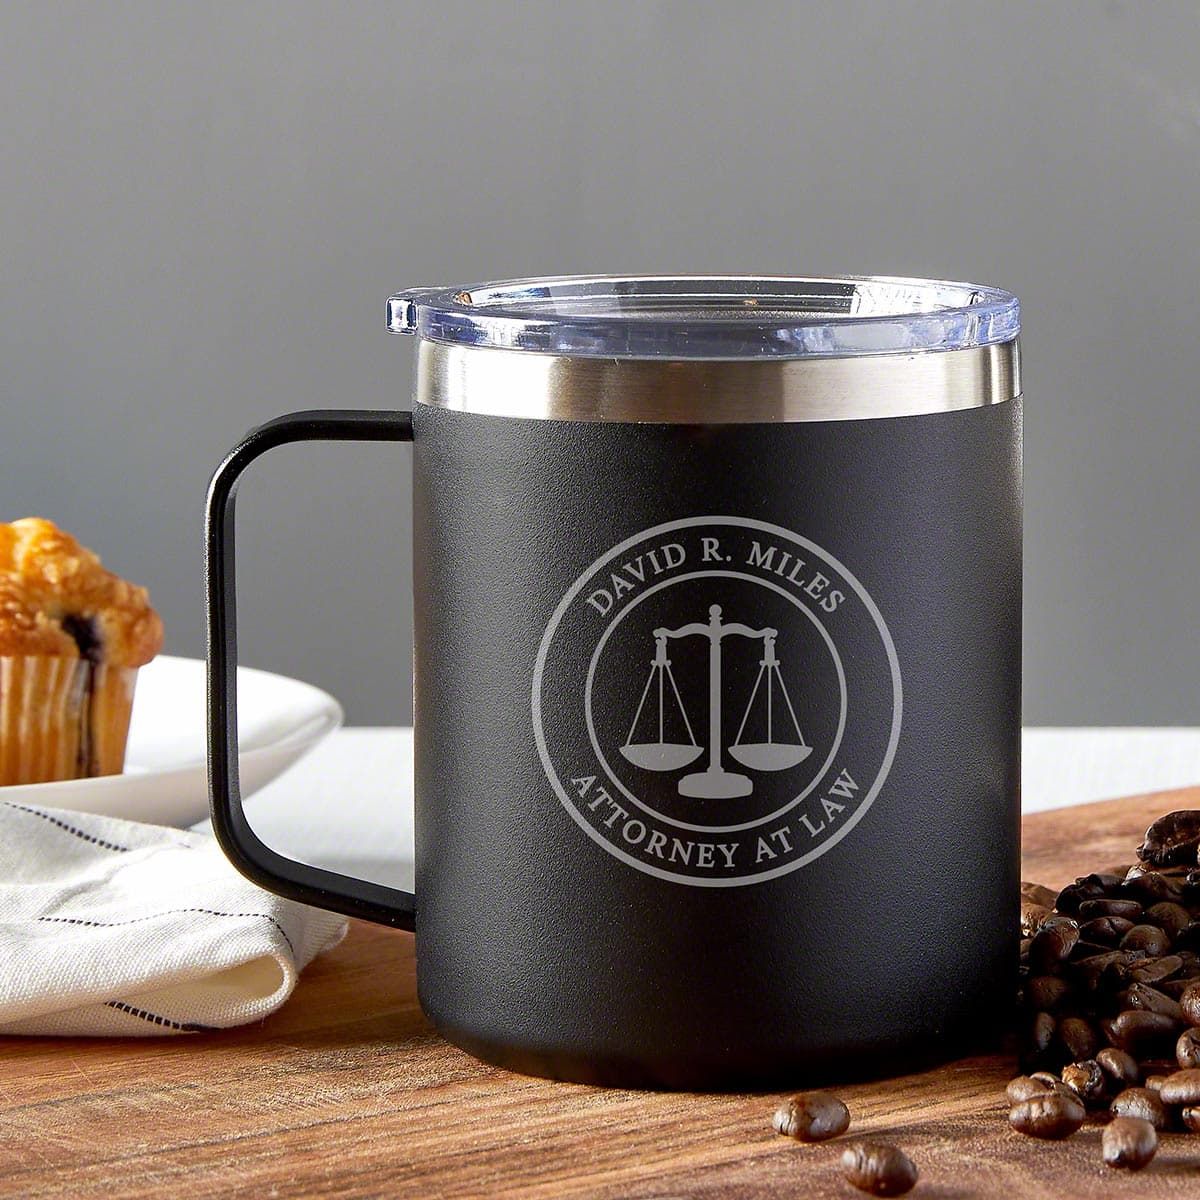 https://images.homewetbar.com/media/catalog/product/p/e/personalized-black-travel-mug-gift-for-attorney-scales-of-justice-p-10520.jpg?store=default&image-type=image